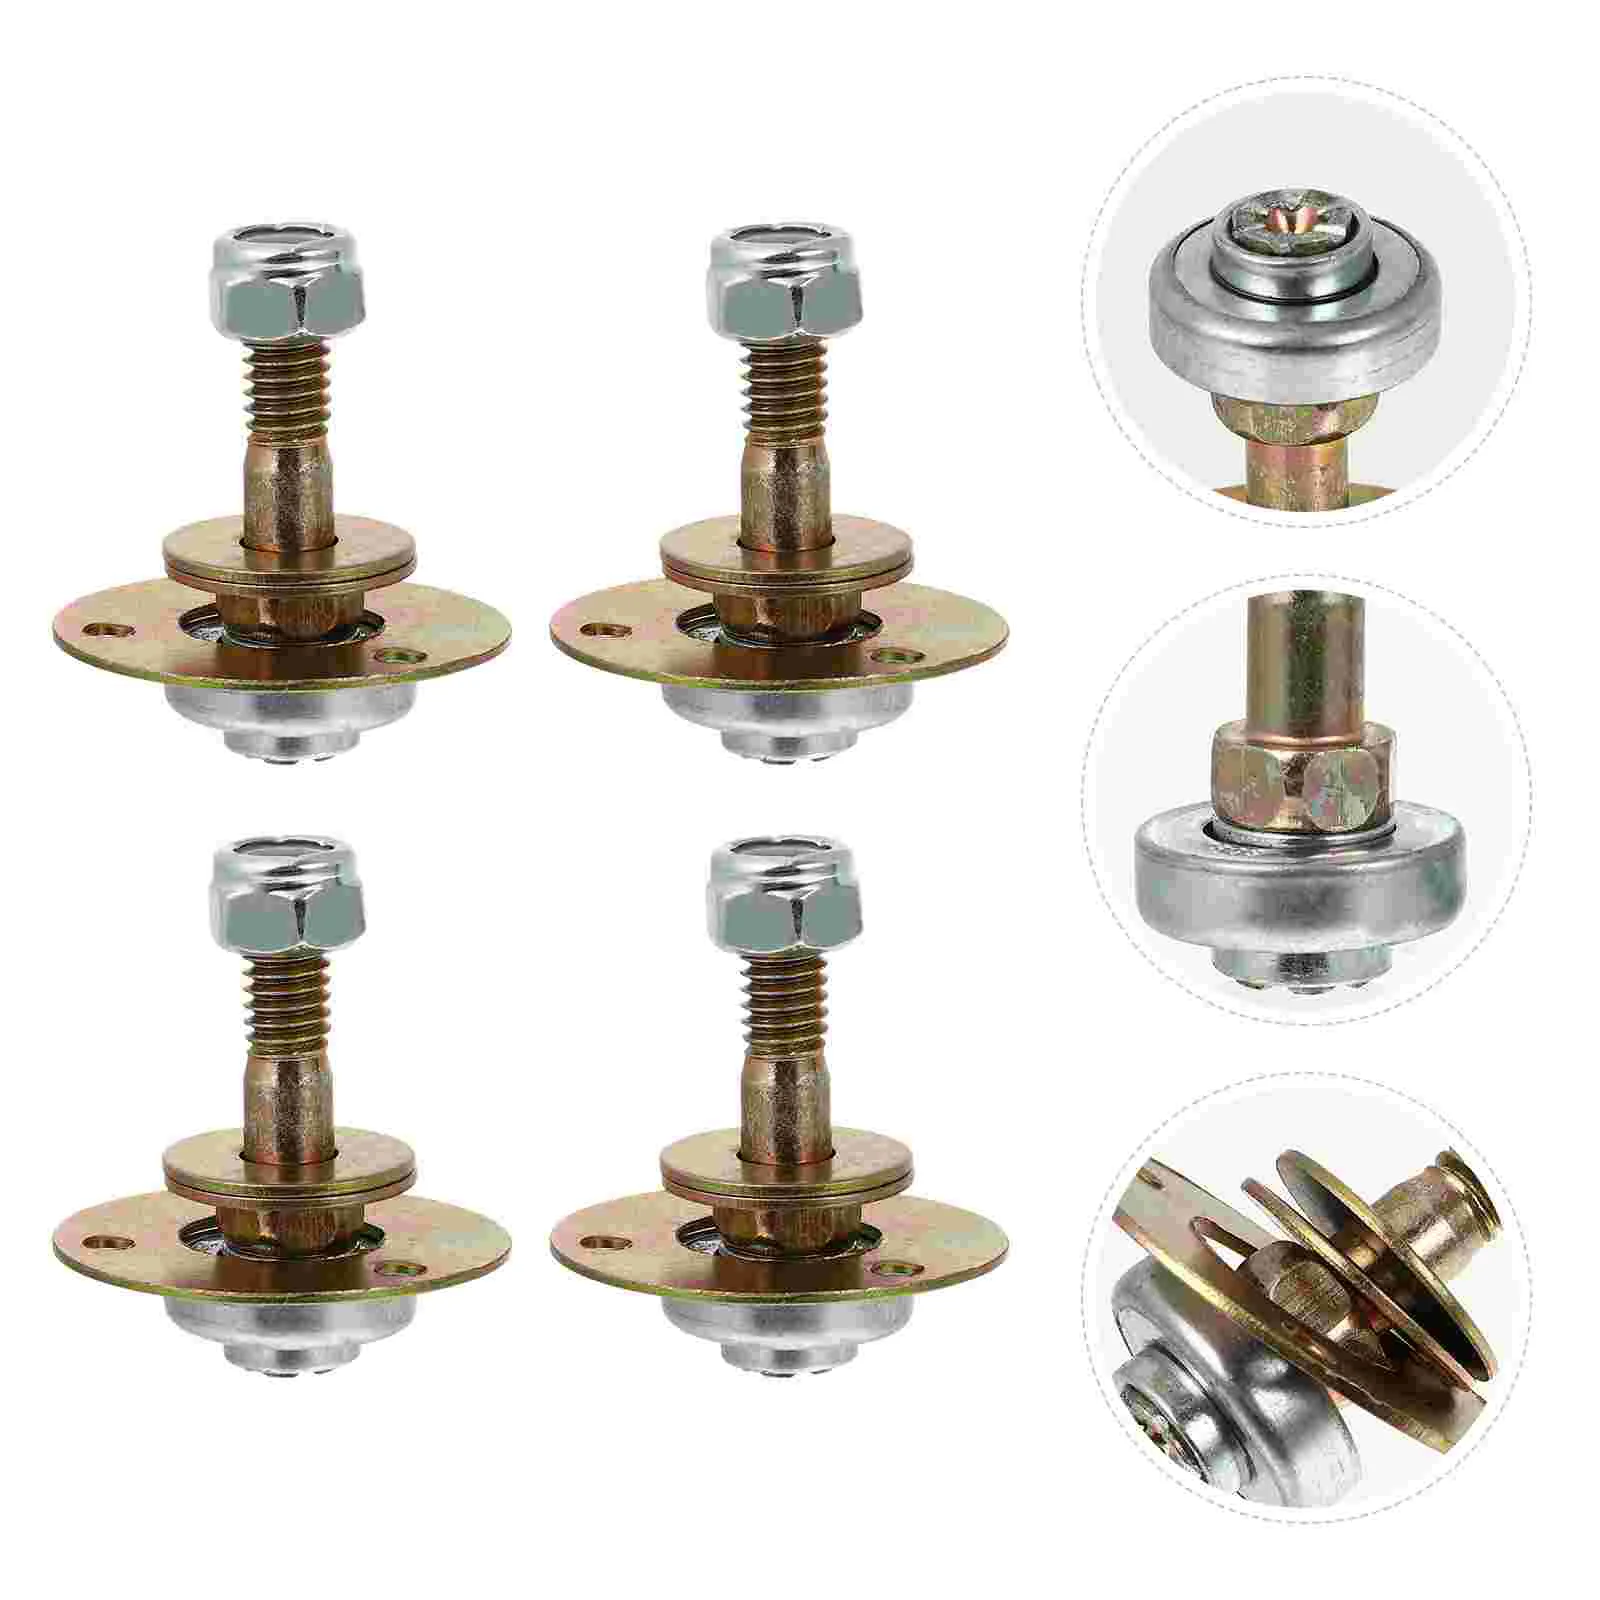 

Furniture Screws Chair Rocking Screws Bearing Connecting Furniture Piece Bolts Accessories Kits Patio Glider Screw Fittings